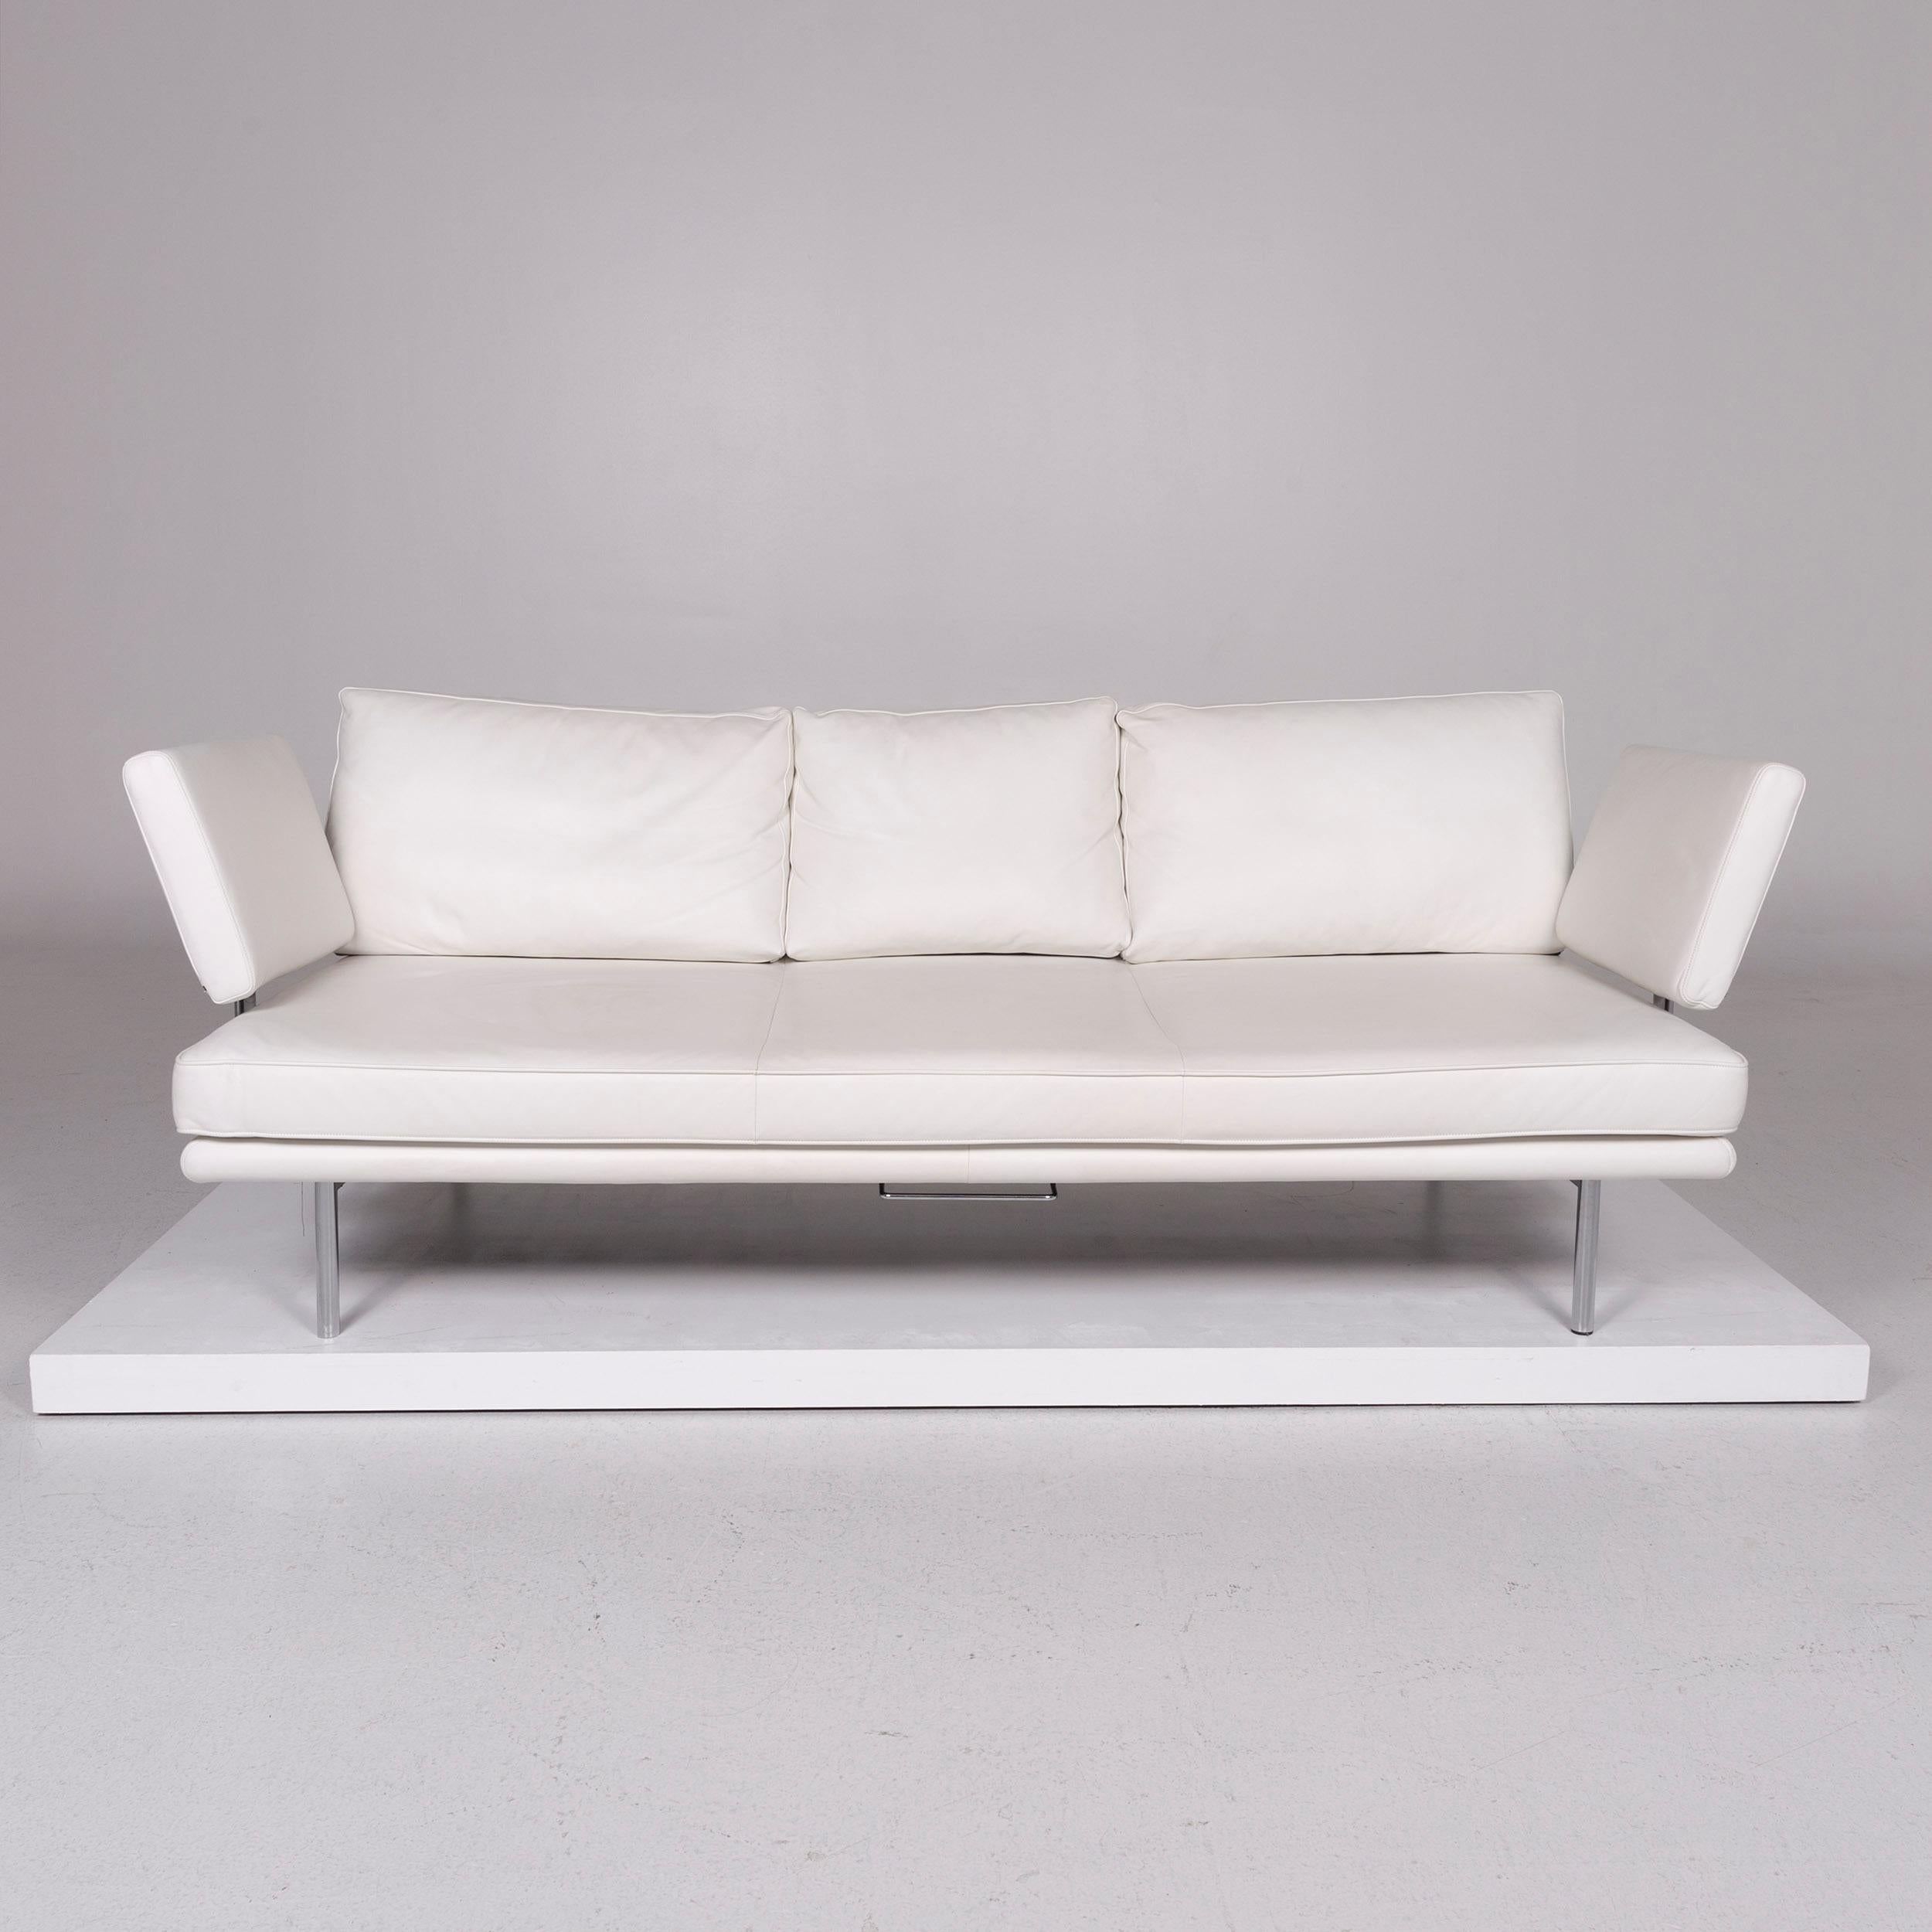 Modern Walter Knoll Living Platform Leather Sofa White Three-Seat Function Couch For Sale